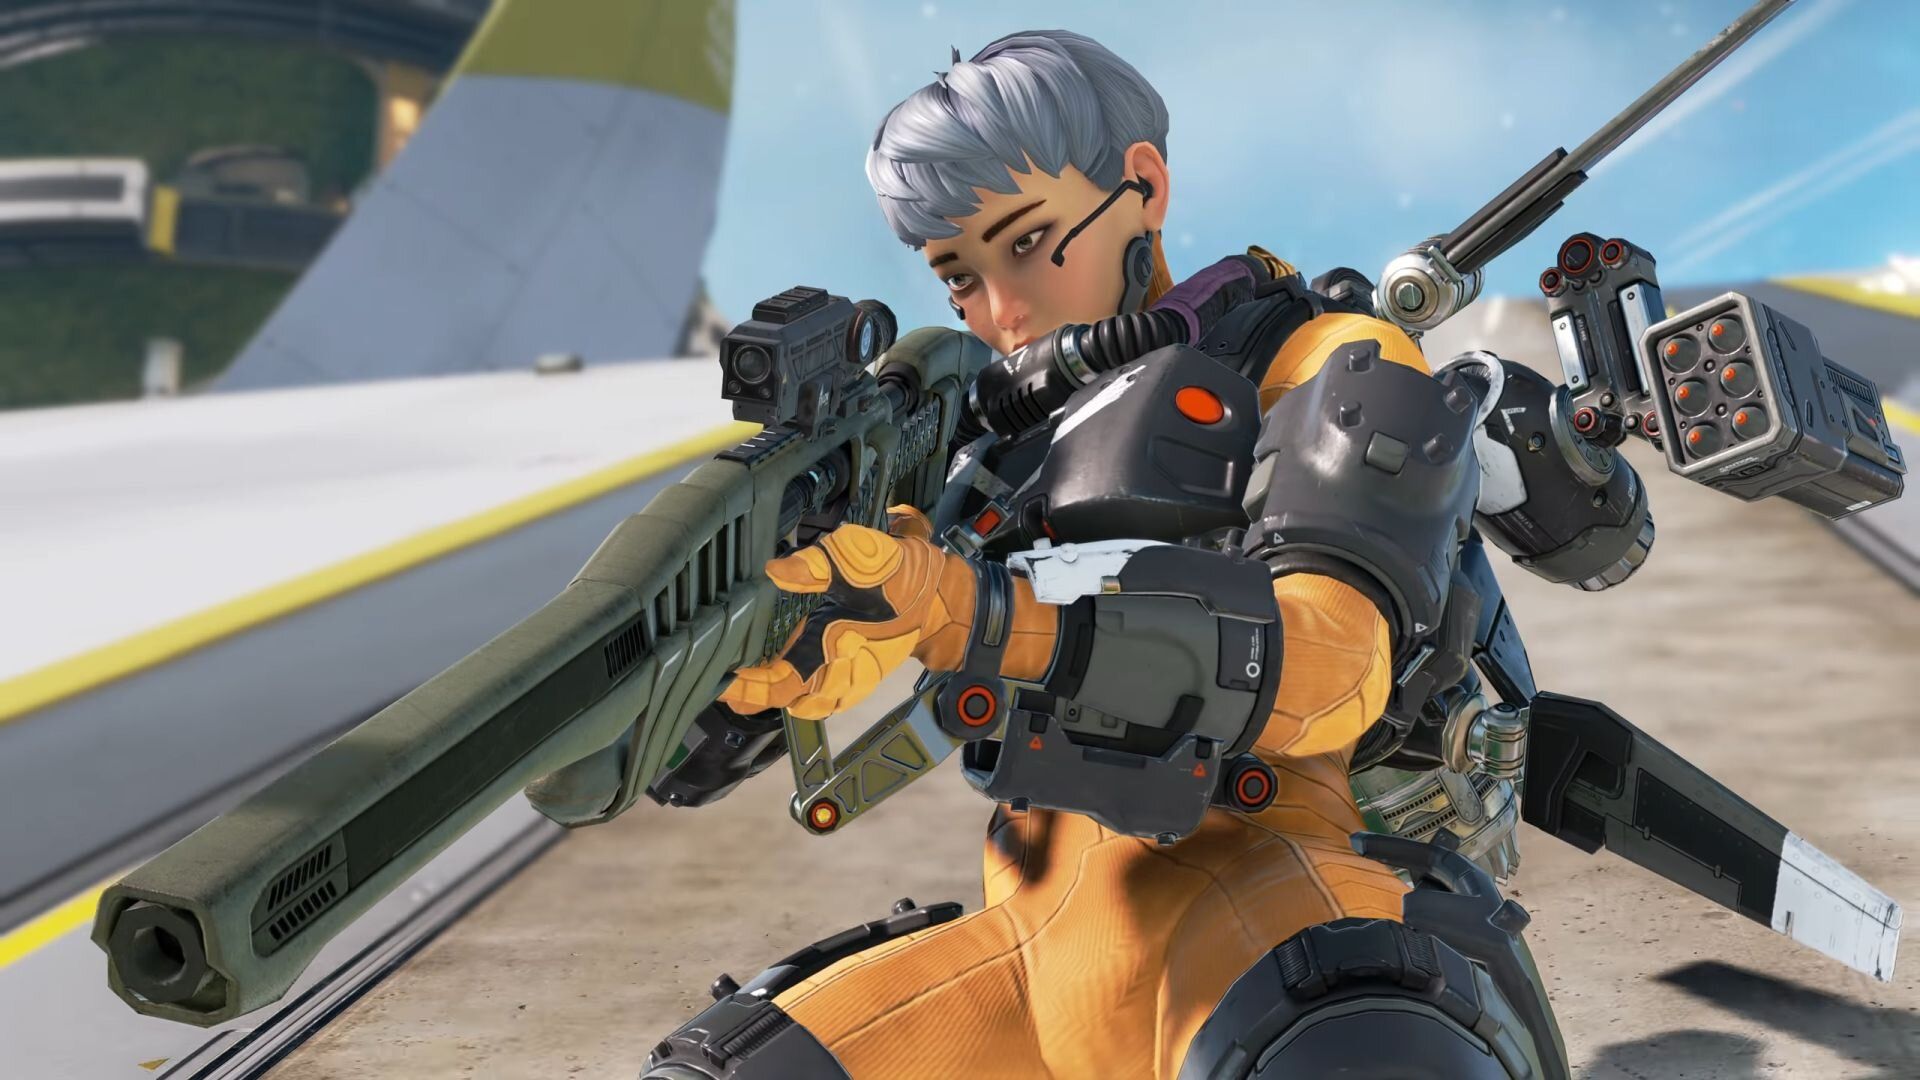 Learn All About Valkyrie in New APEX LEGENDS: LEGACY Showcase.